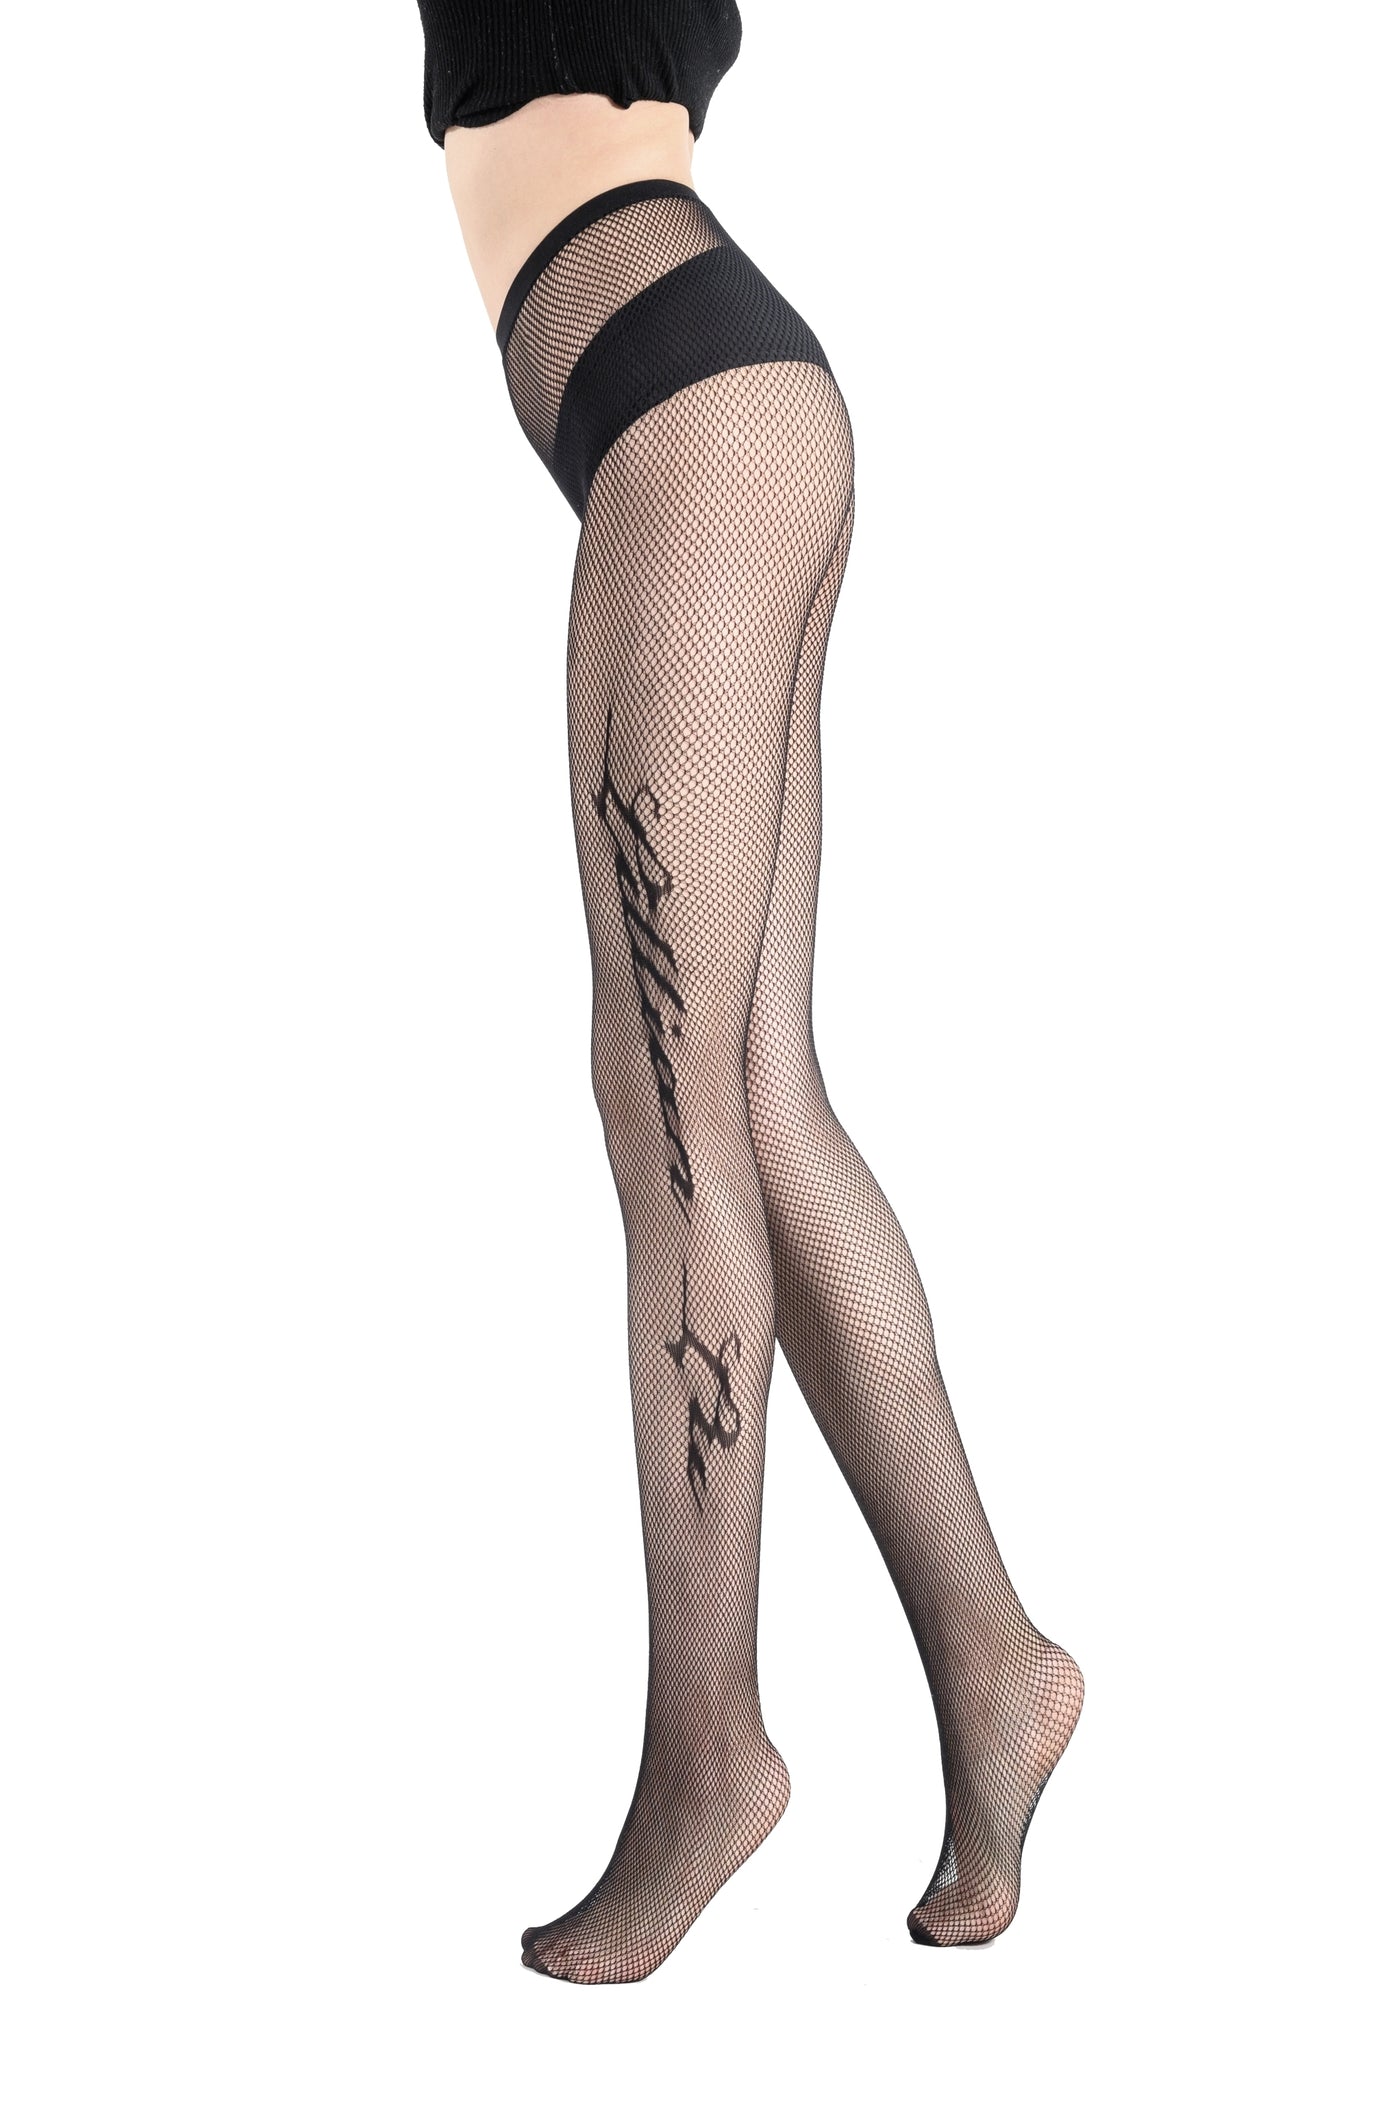 Fishnet Tights 111419-2 Front